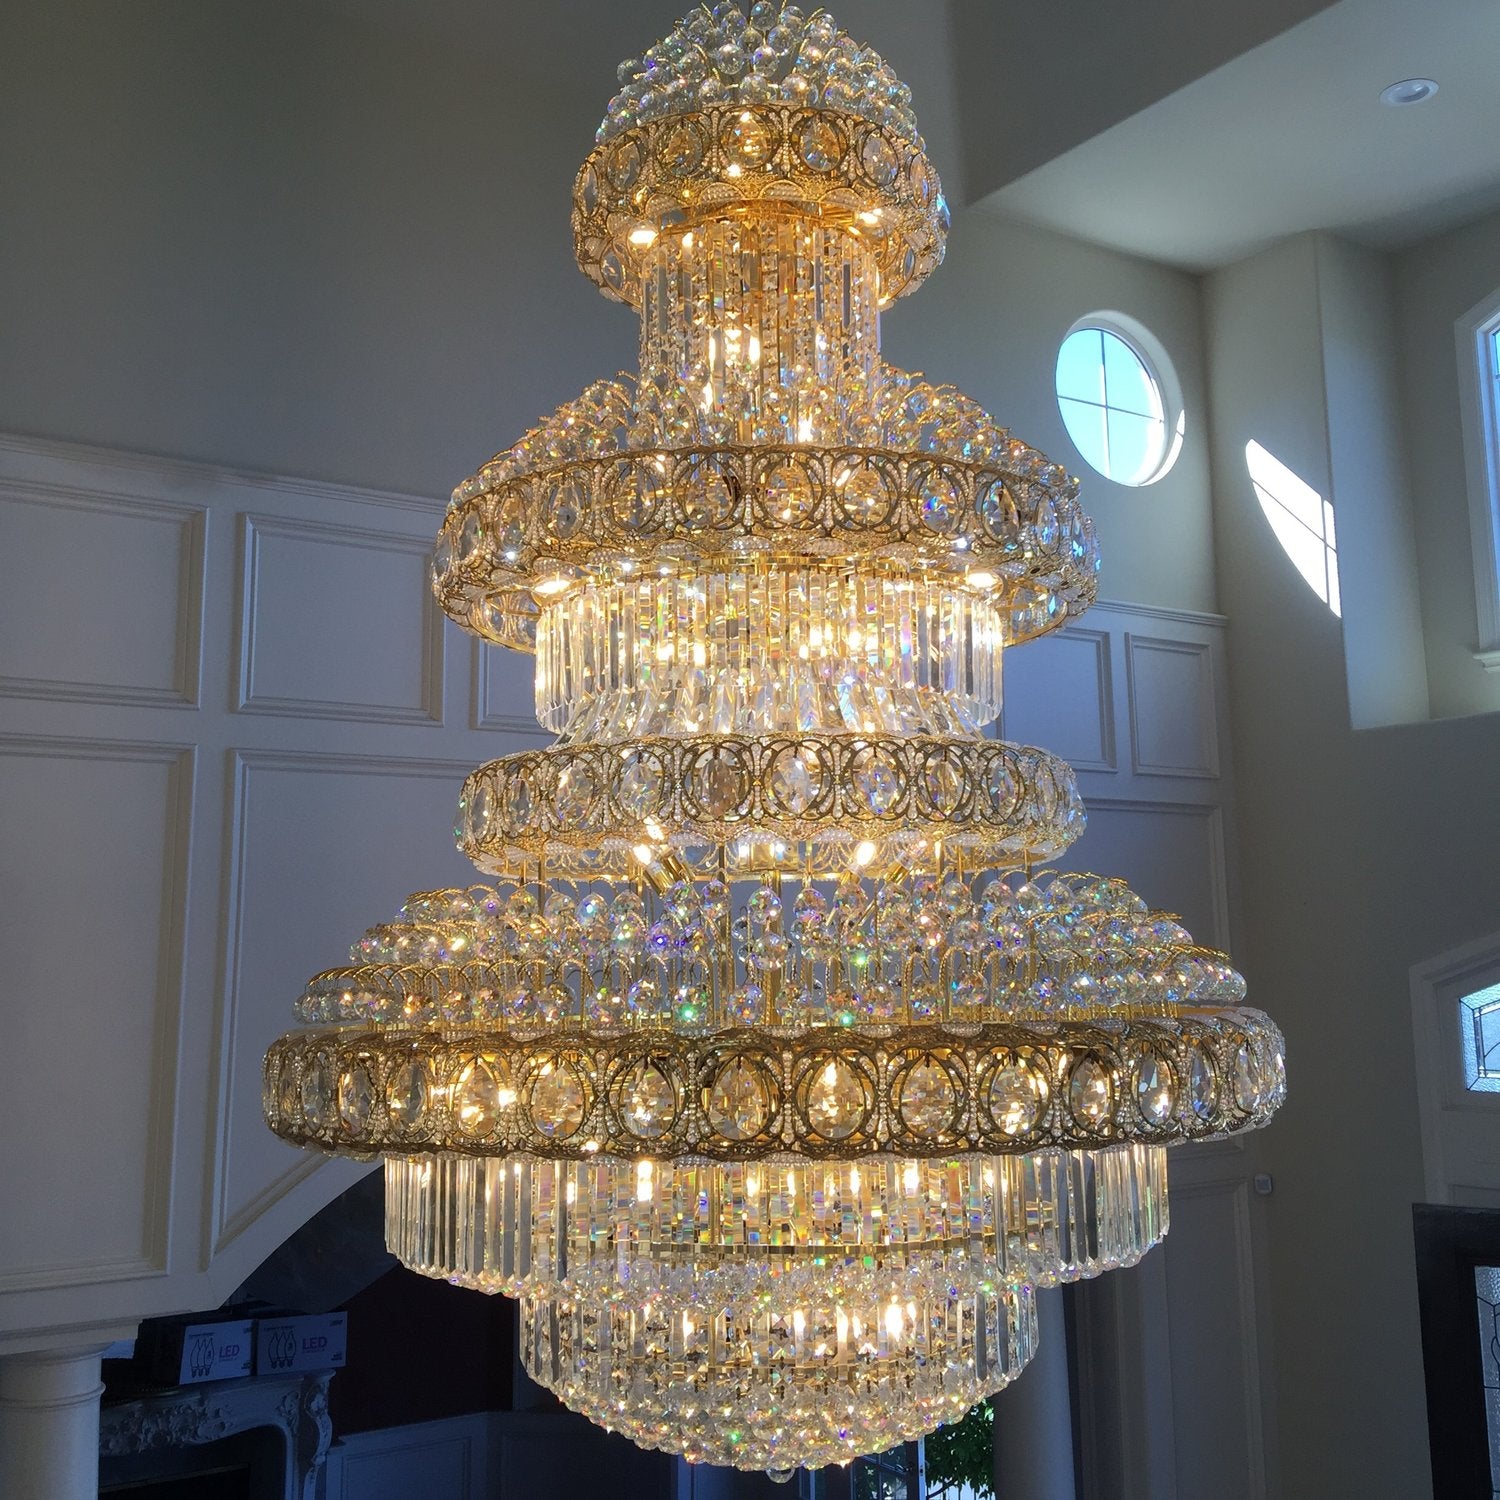 Get a free estimate for the lighting installation of your black, white, large, or small crystal chandelier in California.